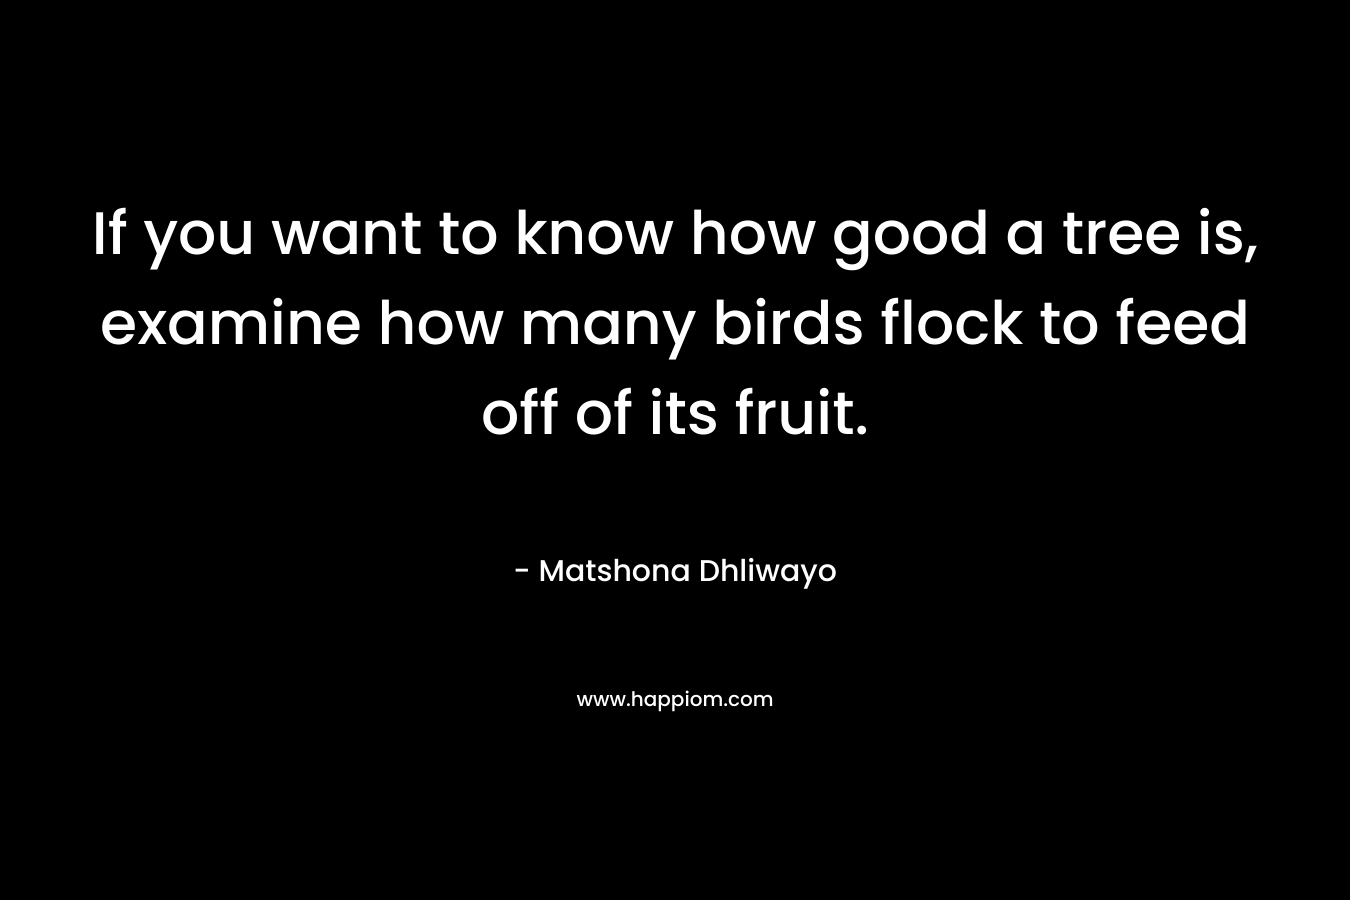 If you want to know how good a tree is, examine how many birds flock to feed off of its fruit. – Matshona Dhliwayo